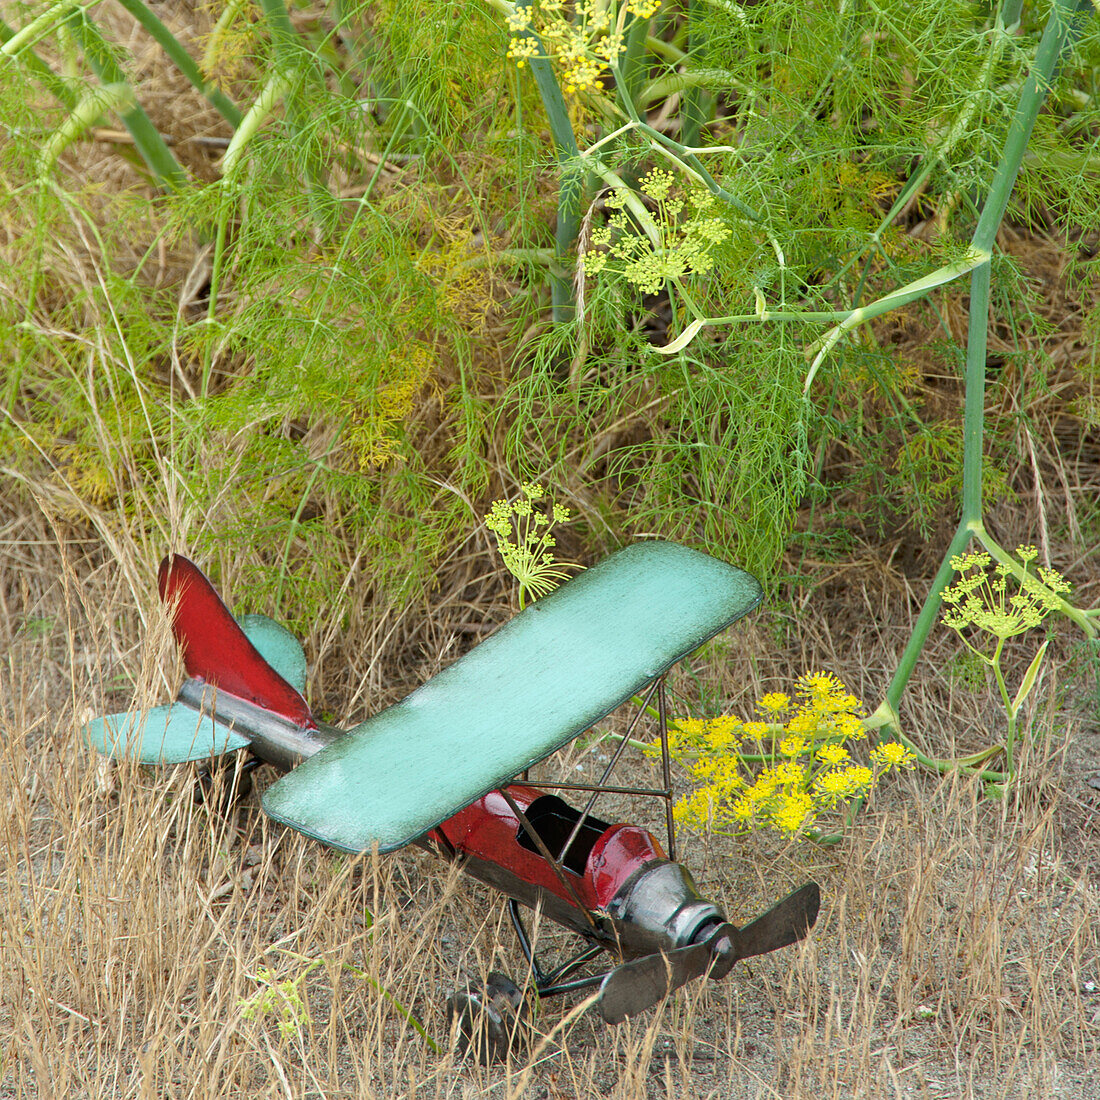 Toy airplane on the ground